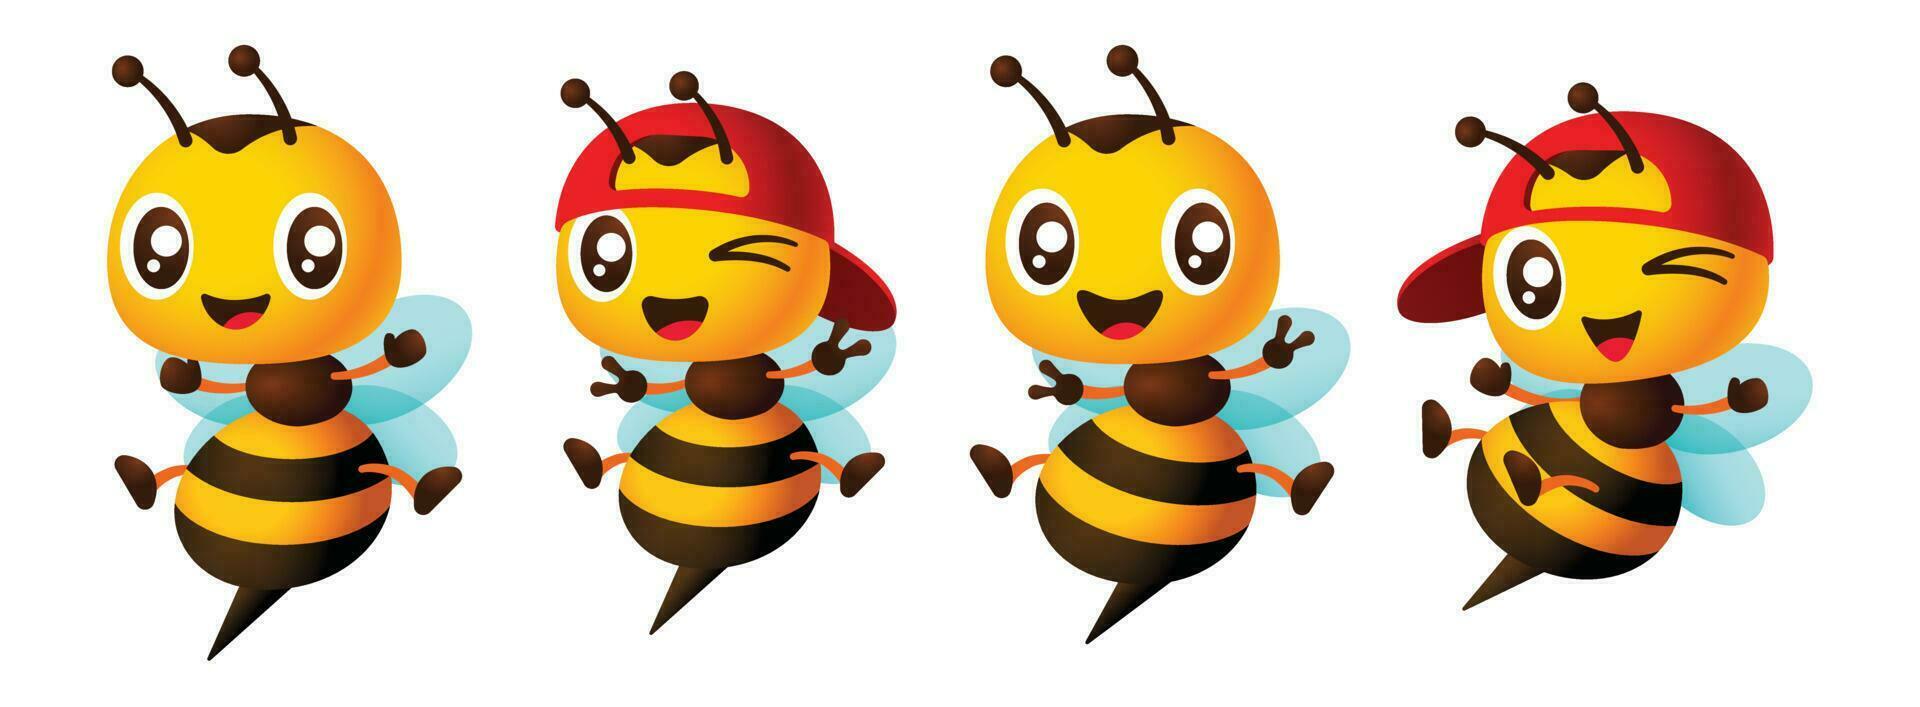 Cartoon cute bee mascot set with different poses vector illustration